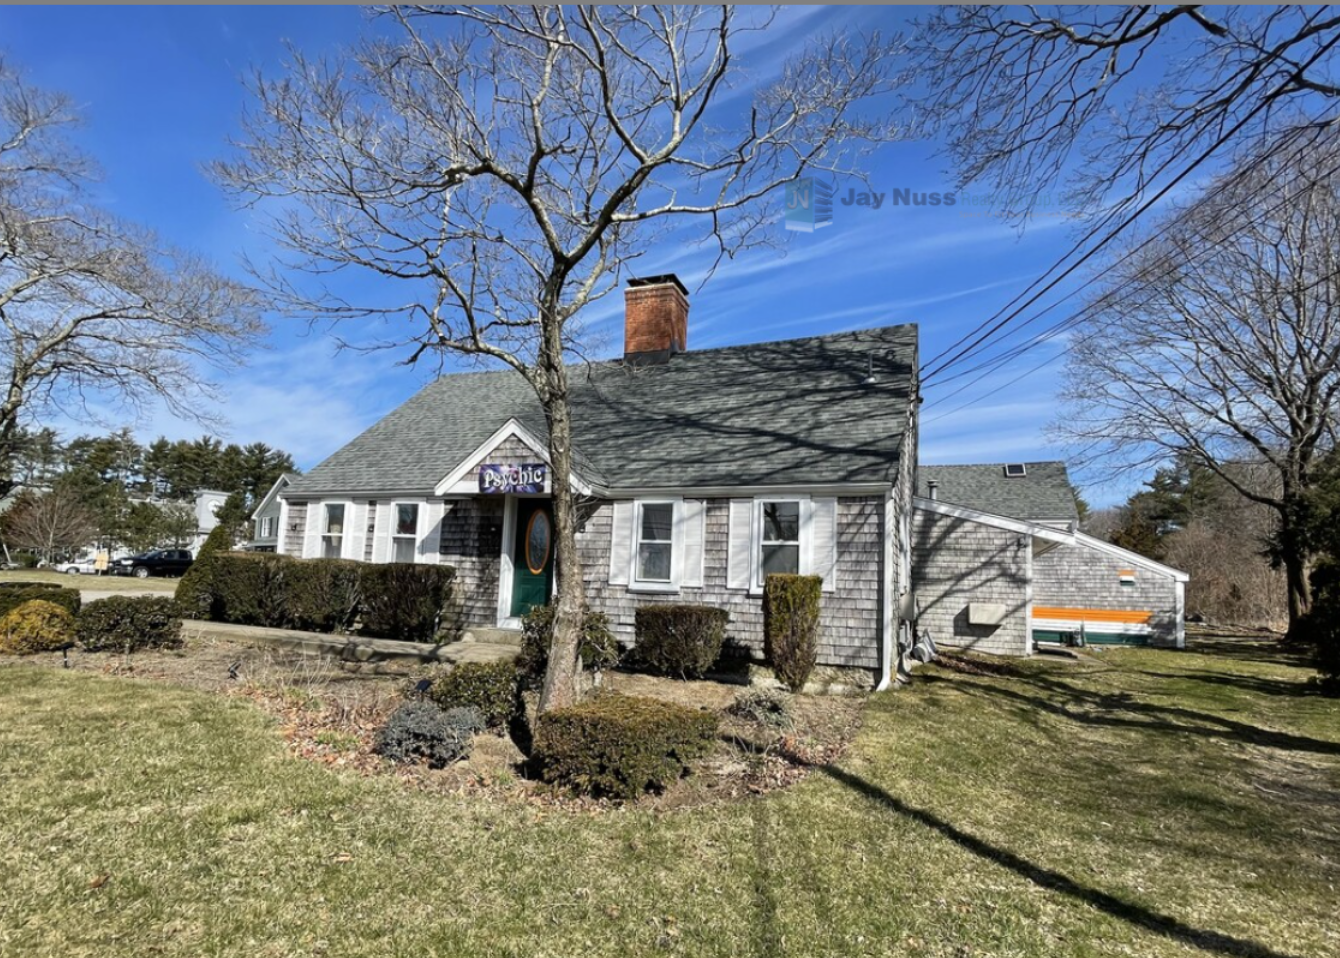 468 Plain St, Marshfield, MA 02050-2750      Route 139 Frontage